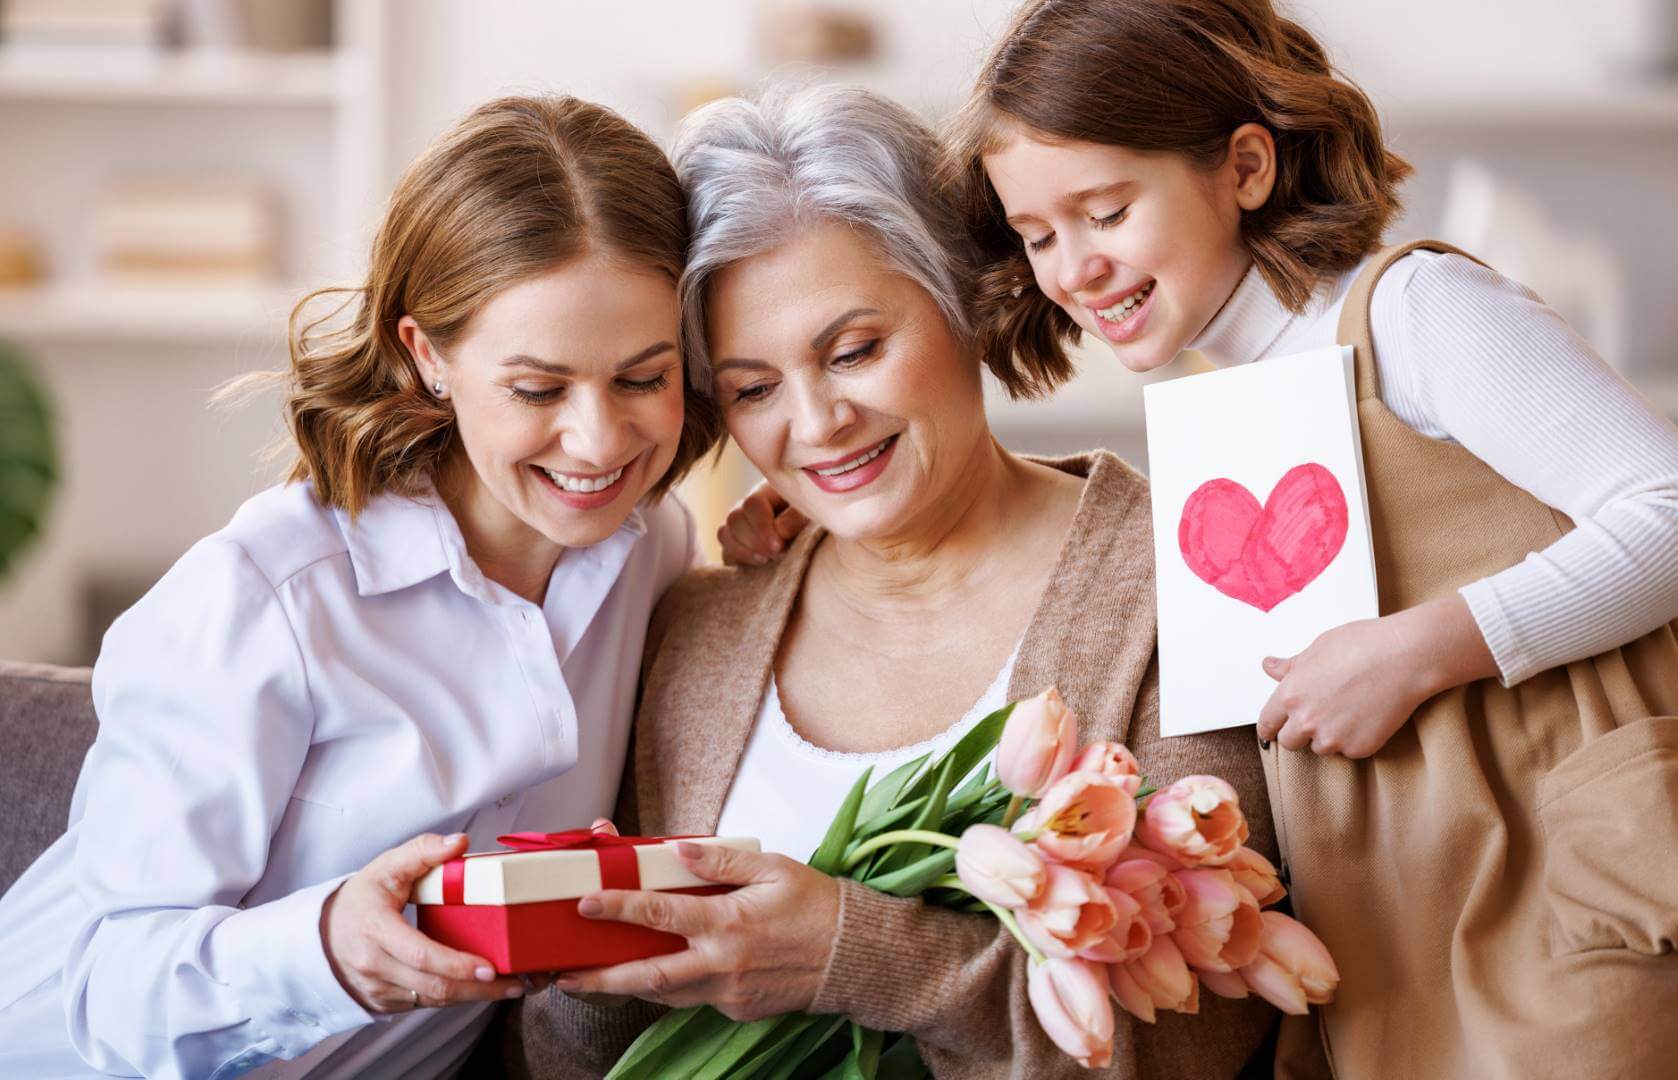 Women exchanging gifts for Mother's Day